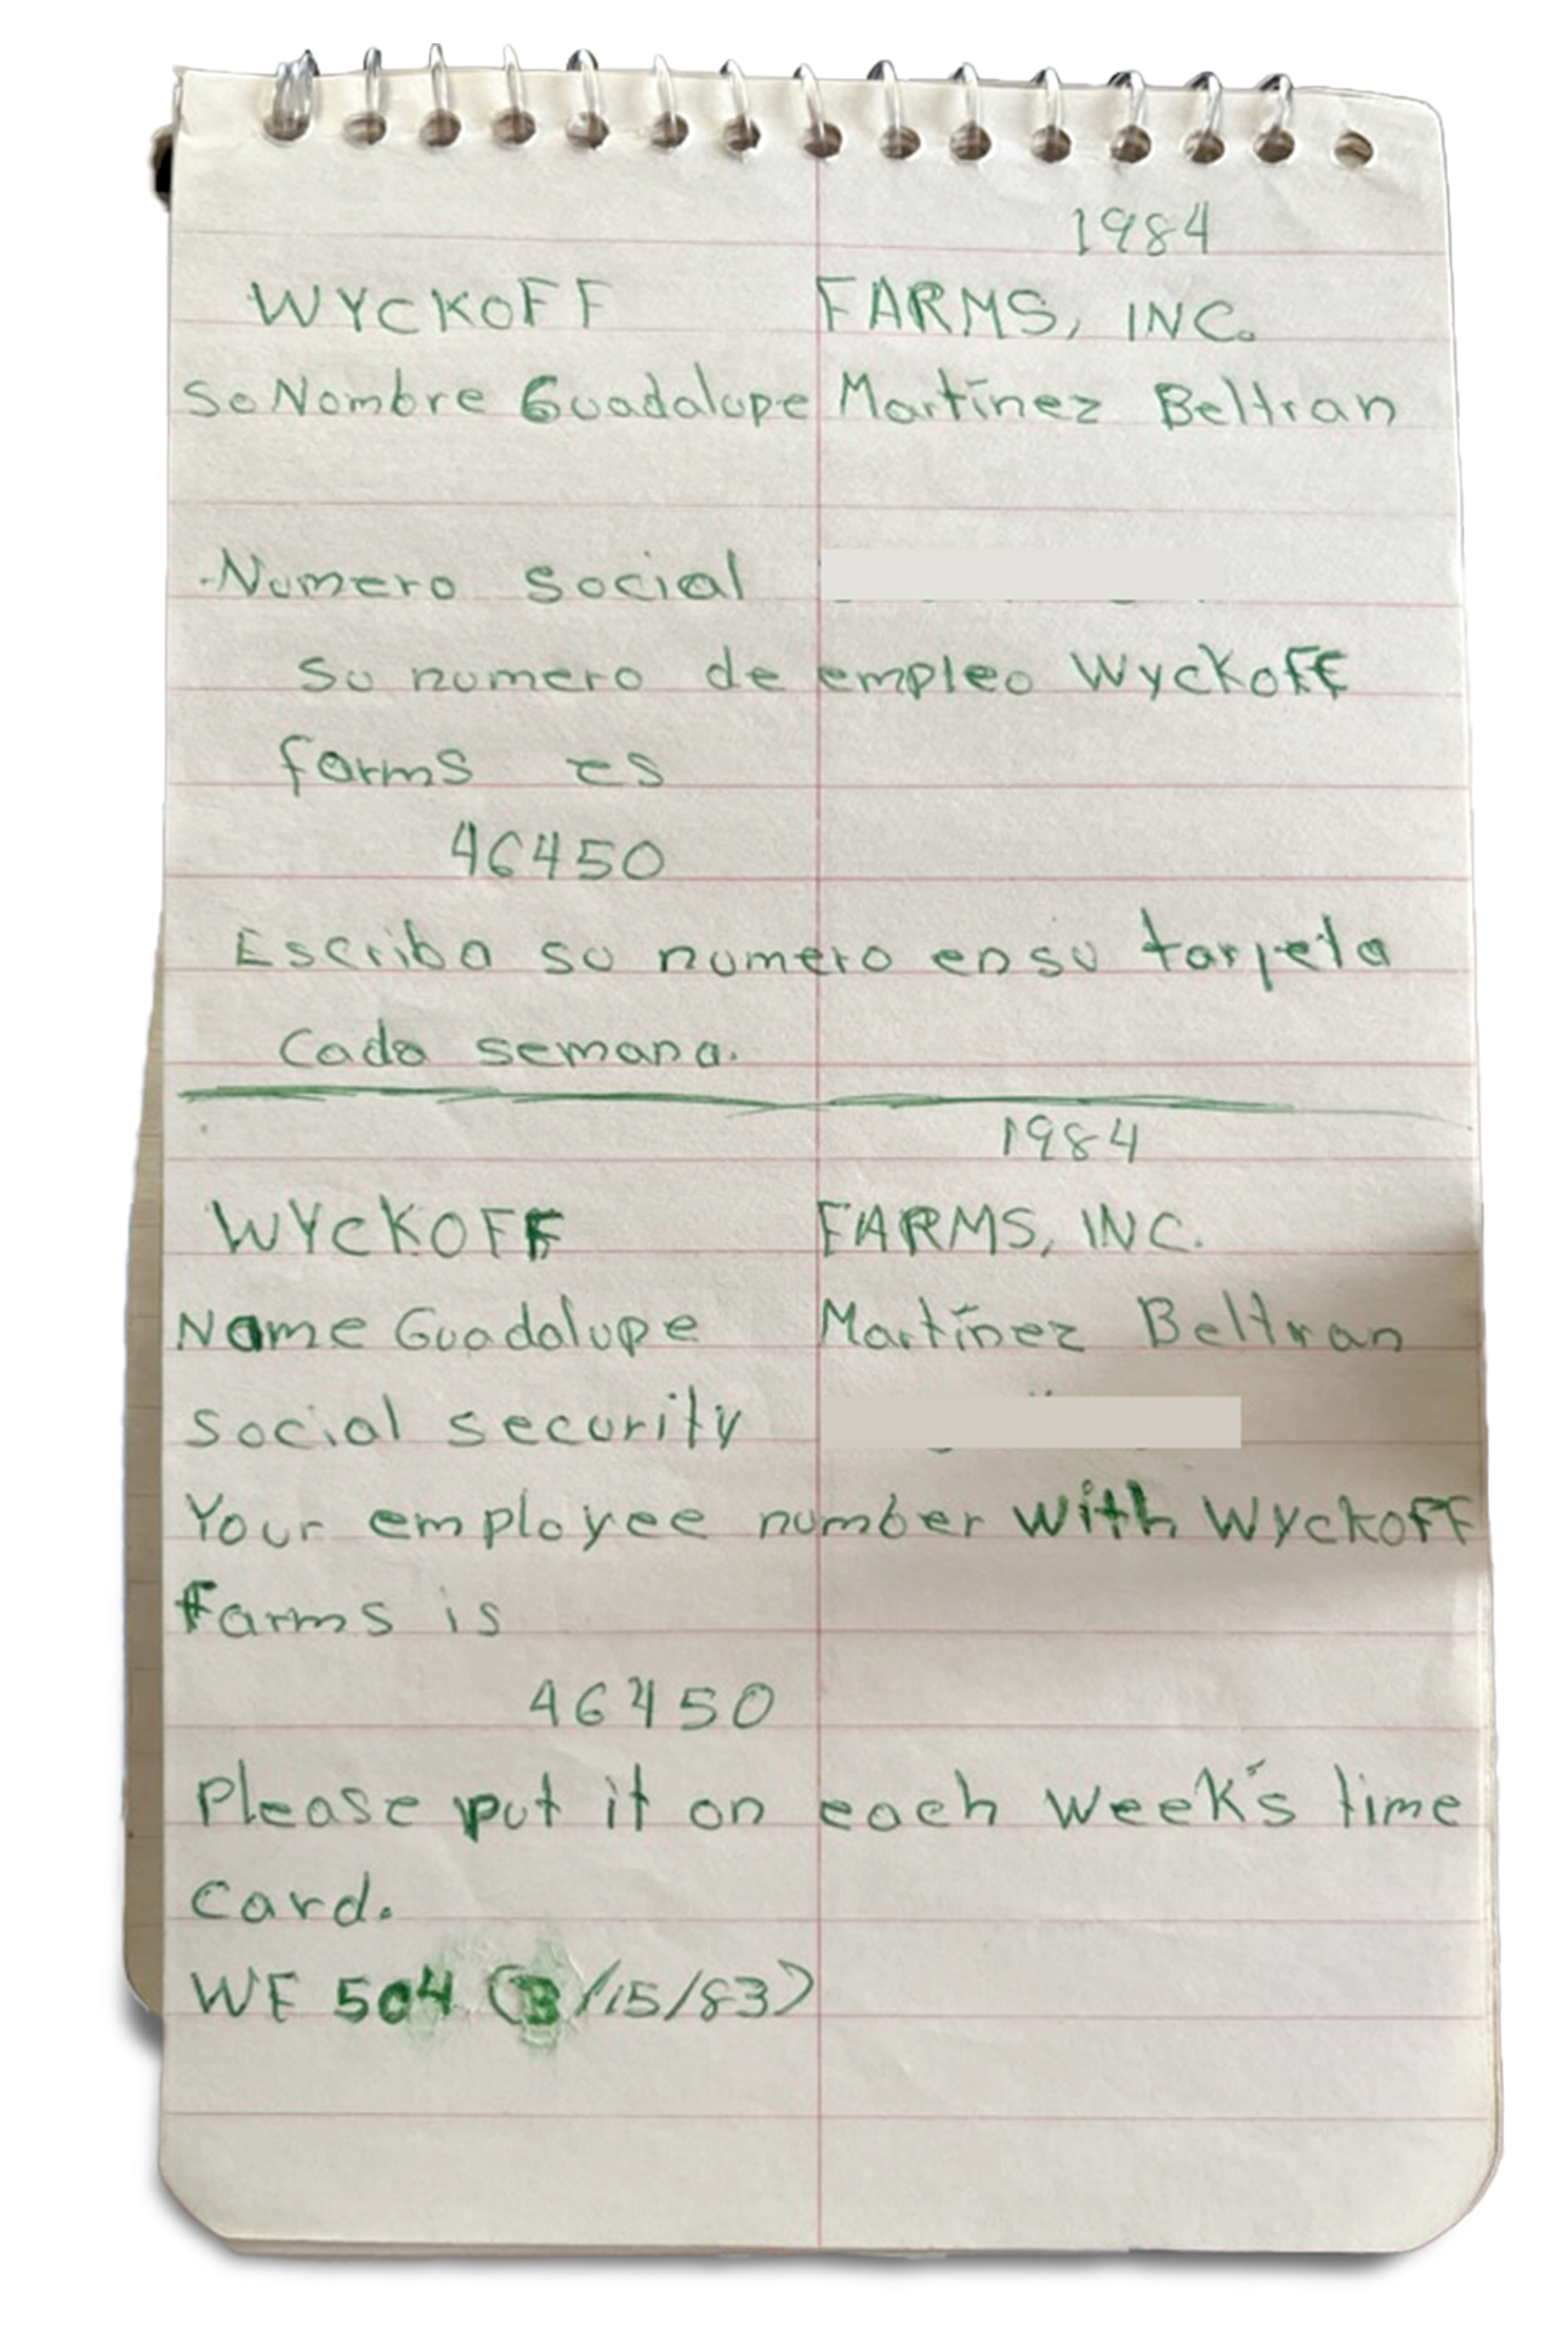 Handwritten notes in Spanish and English. "Wyckoff Farms Inc. 1984"